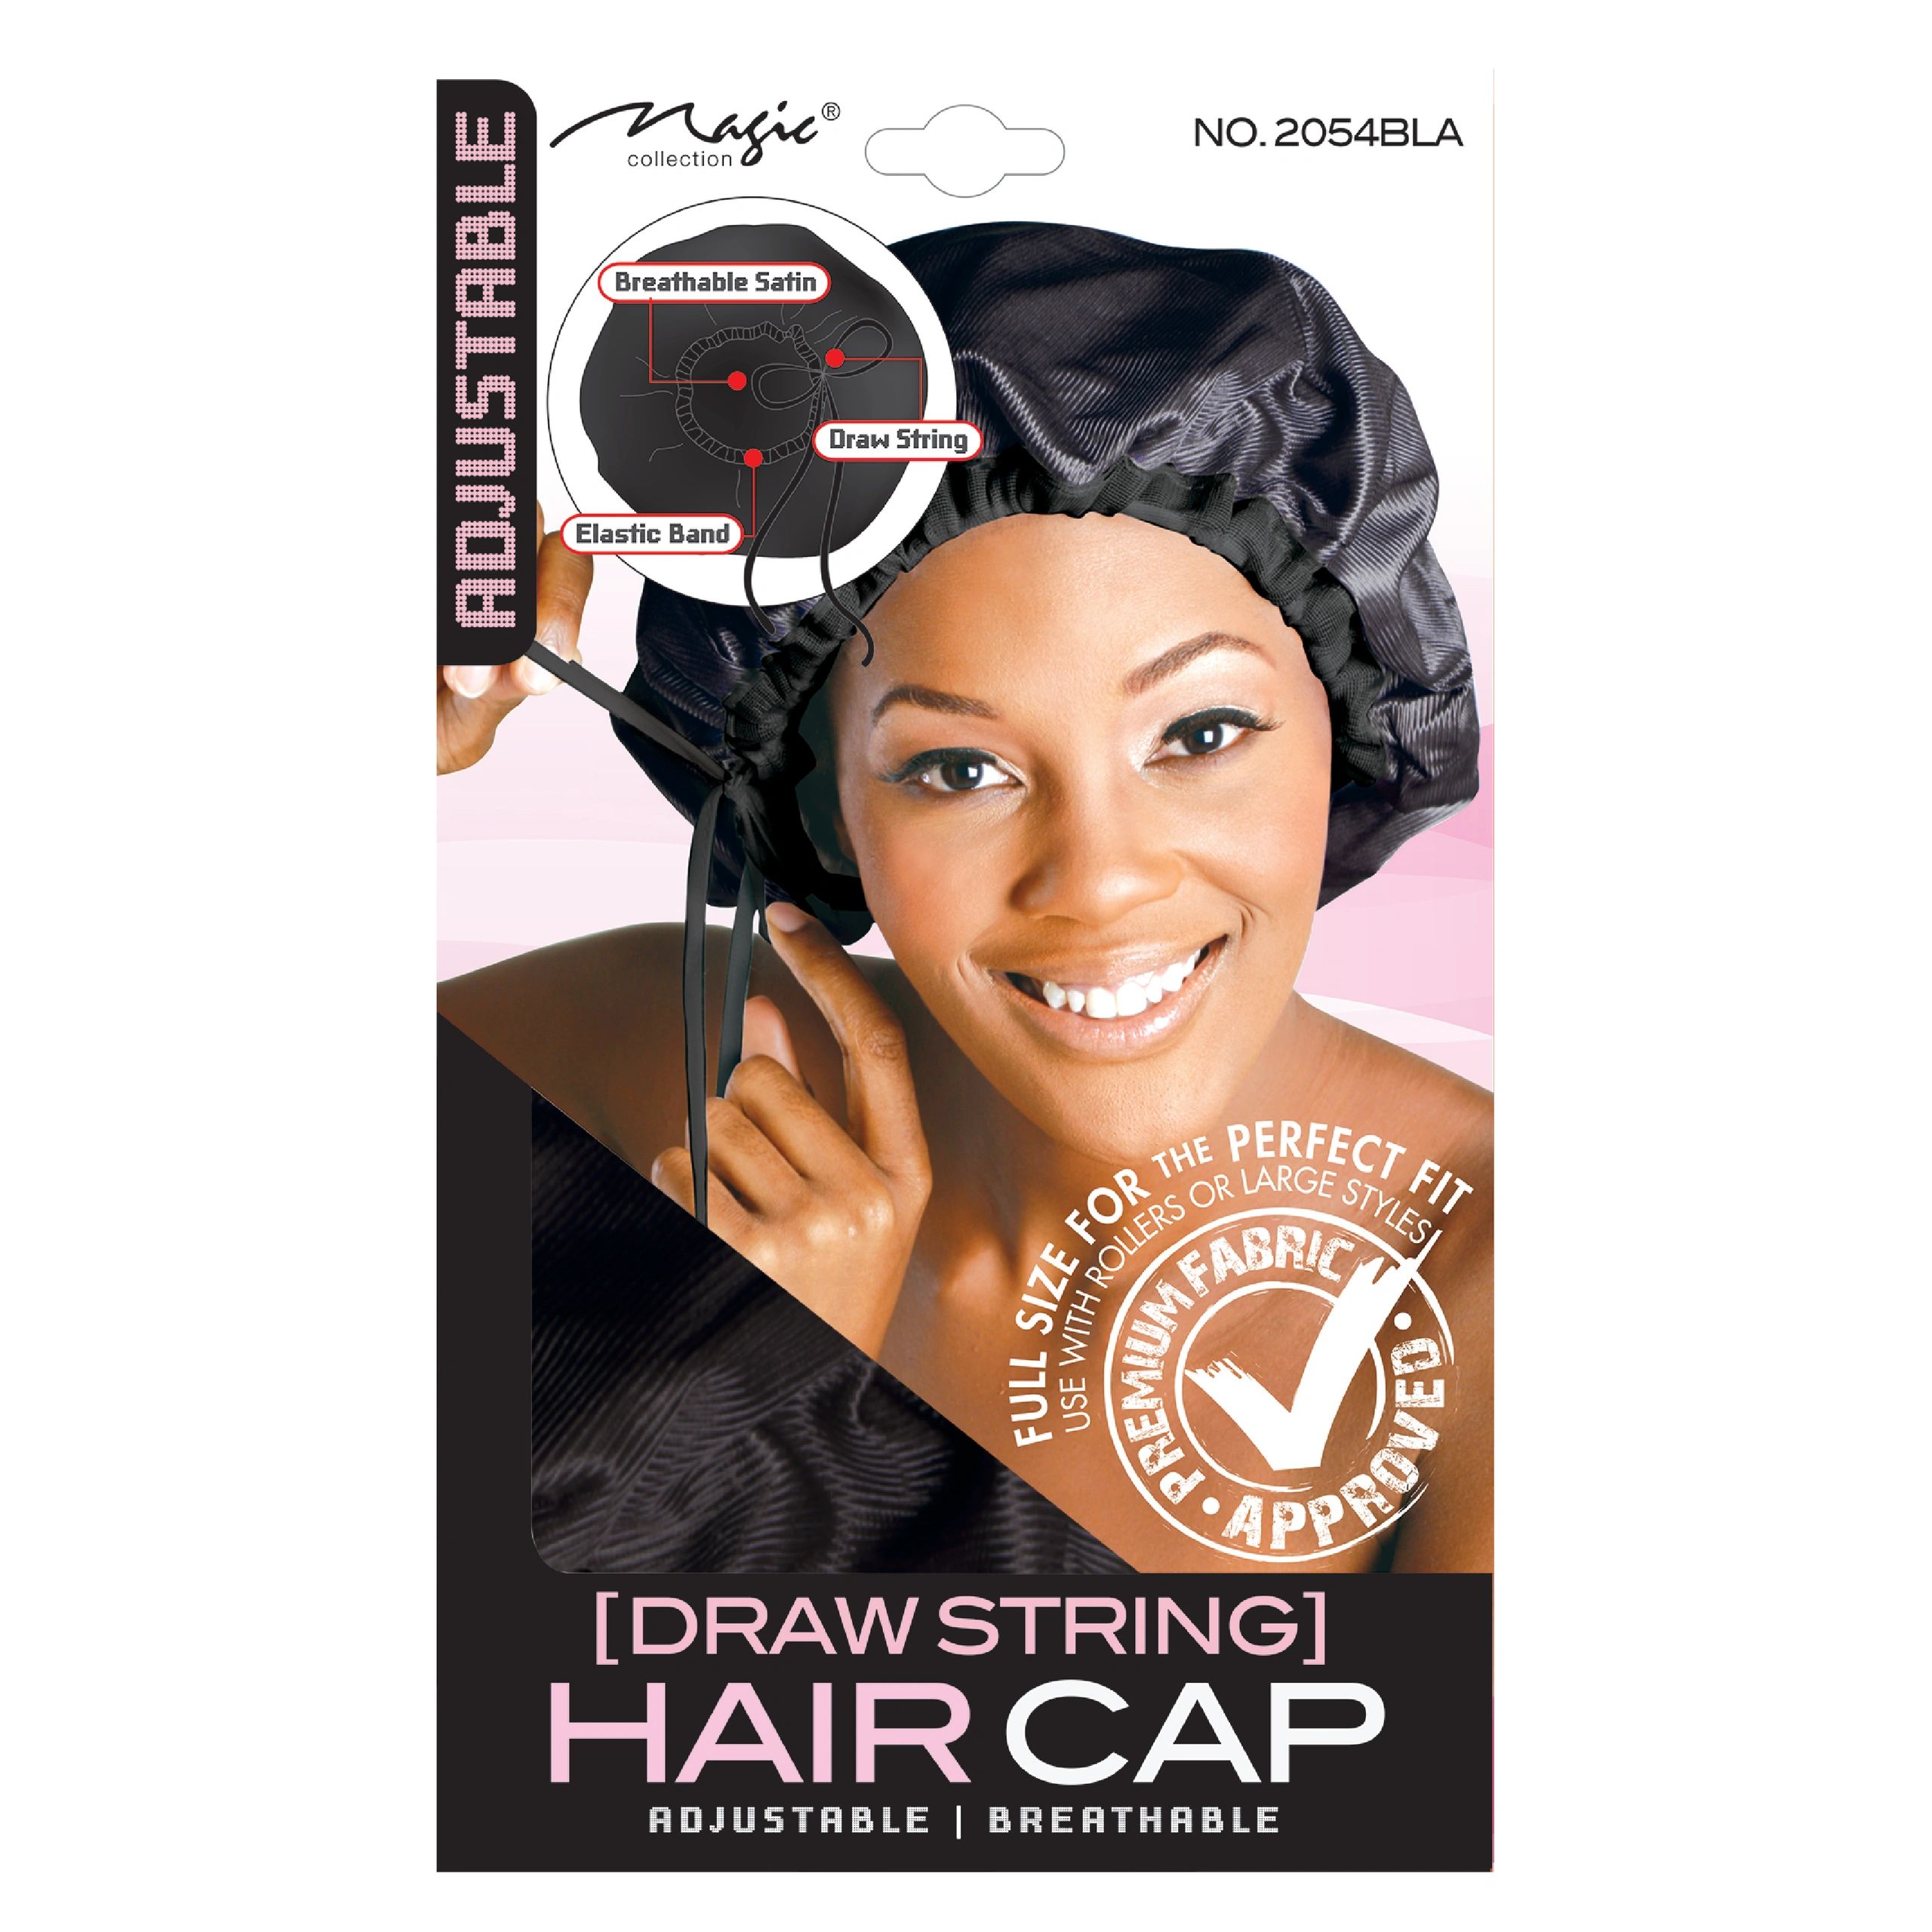 download haircap for free